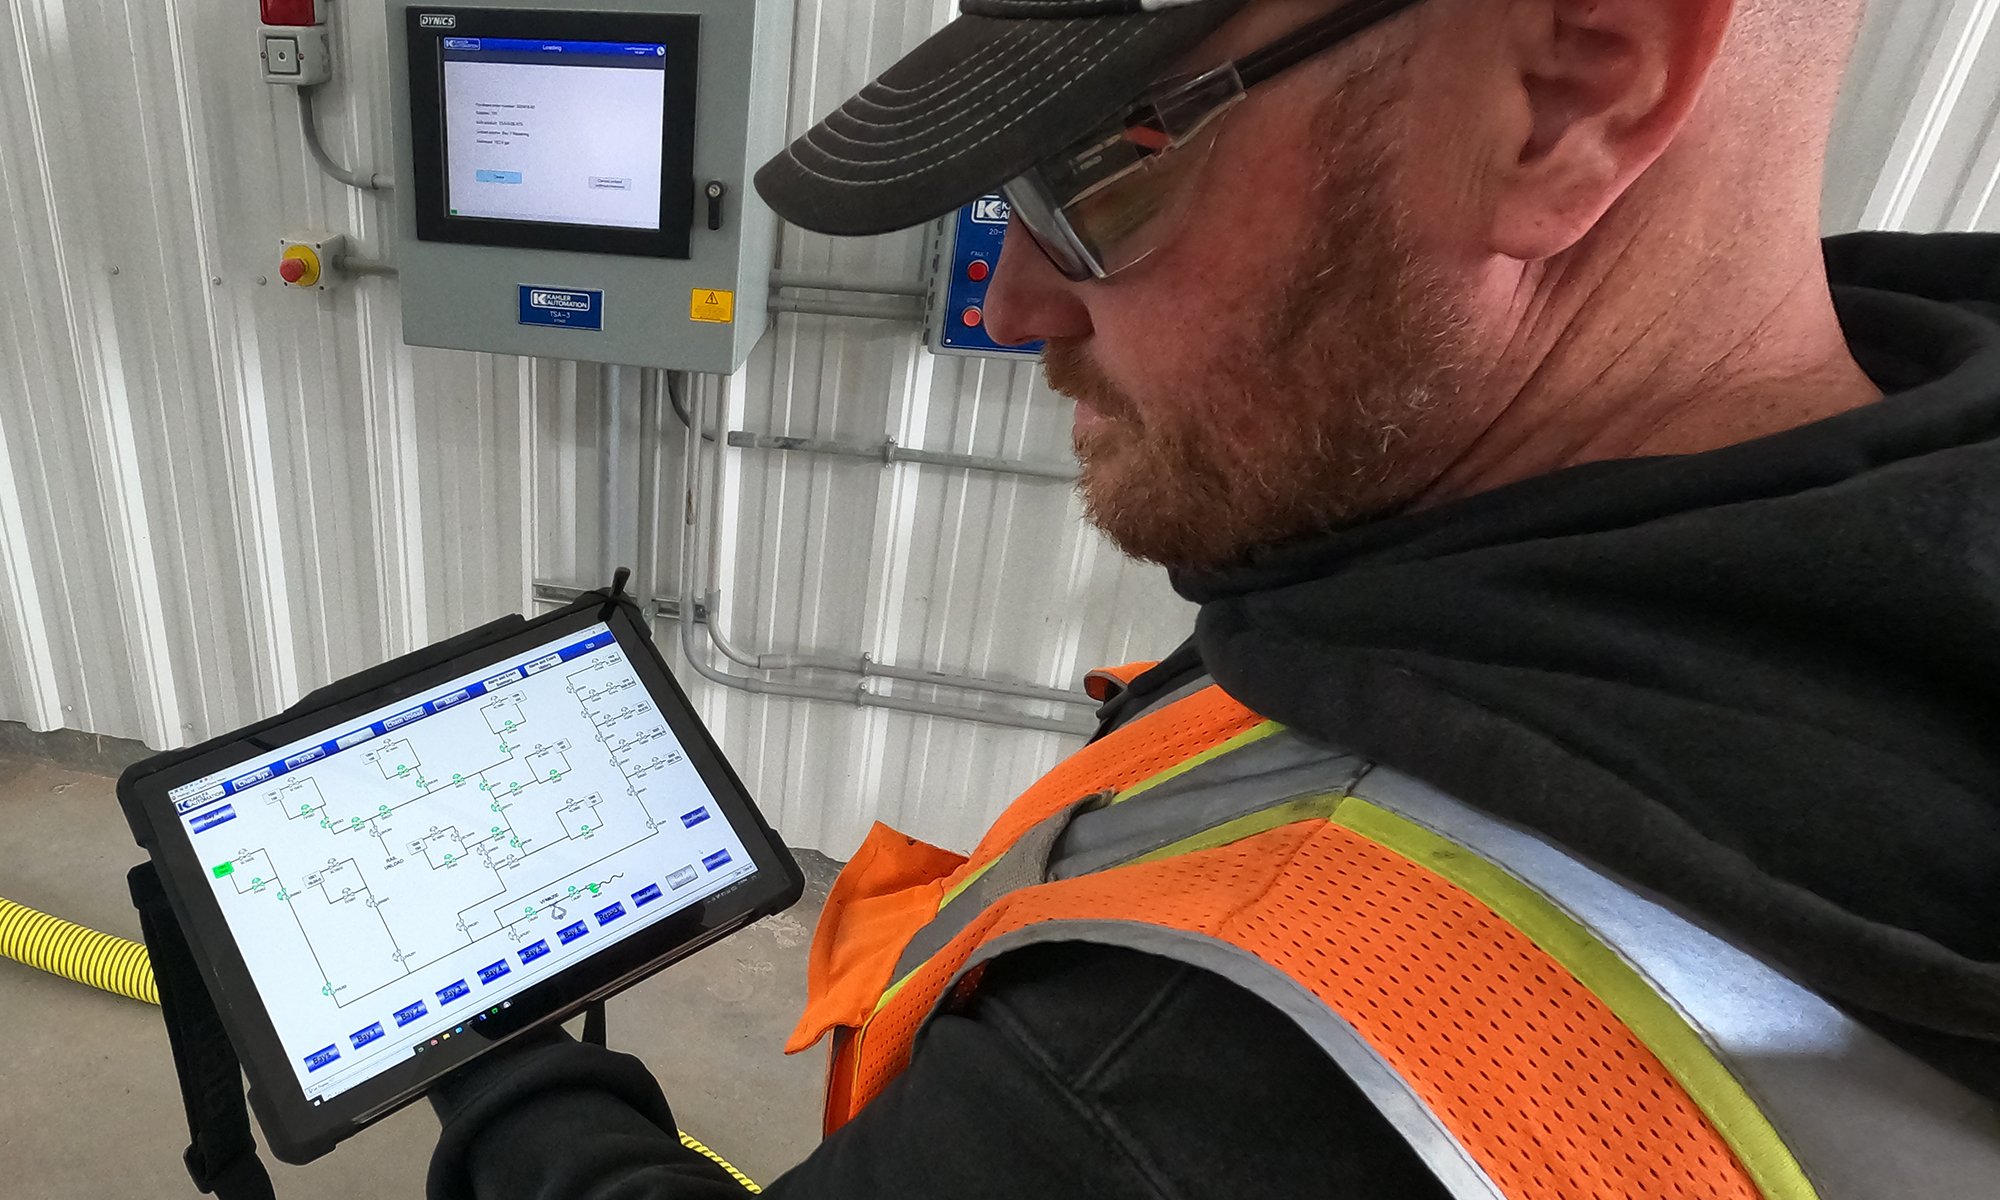  Tablets allow managers to easily check the status of bays, valves, and pumps to configure systems from anywhere on site. 